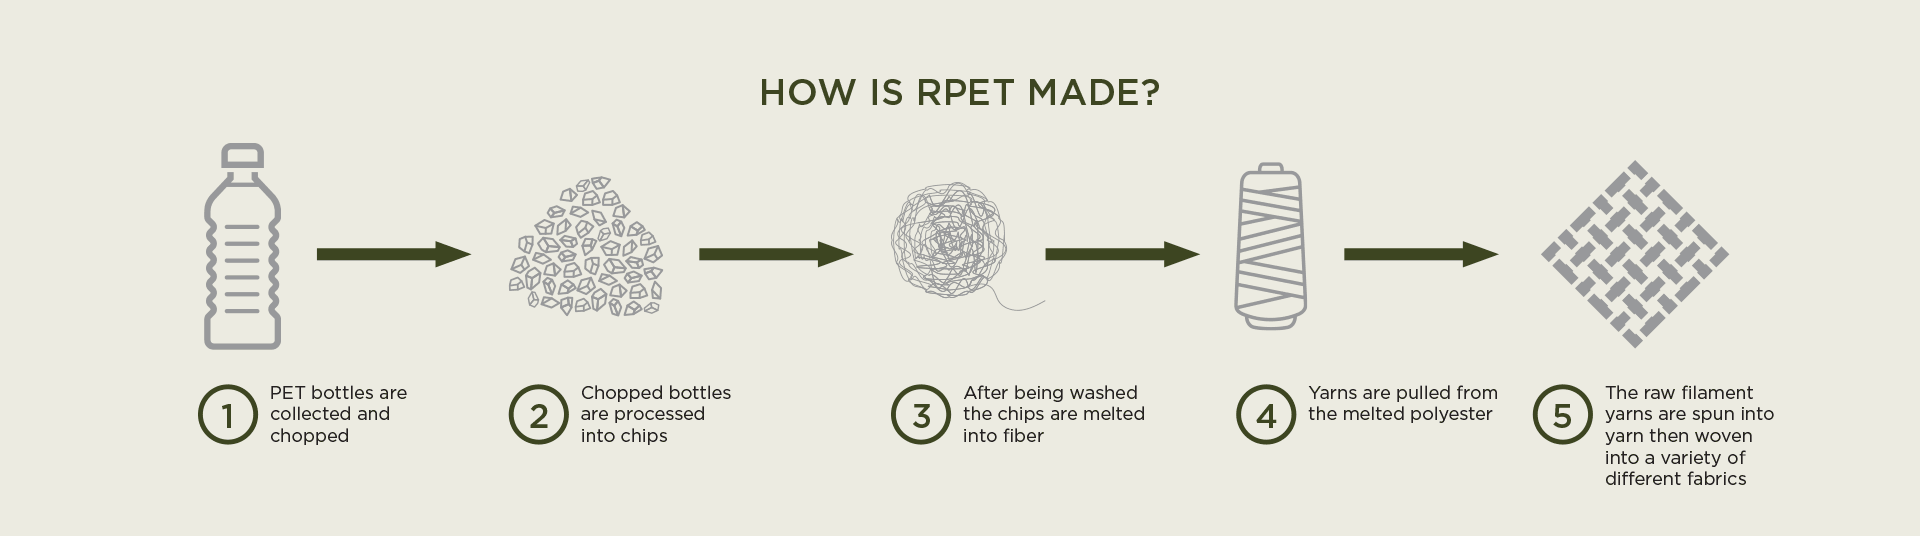 How is RPET made